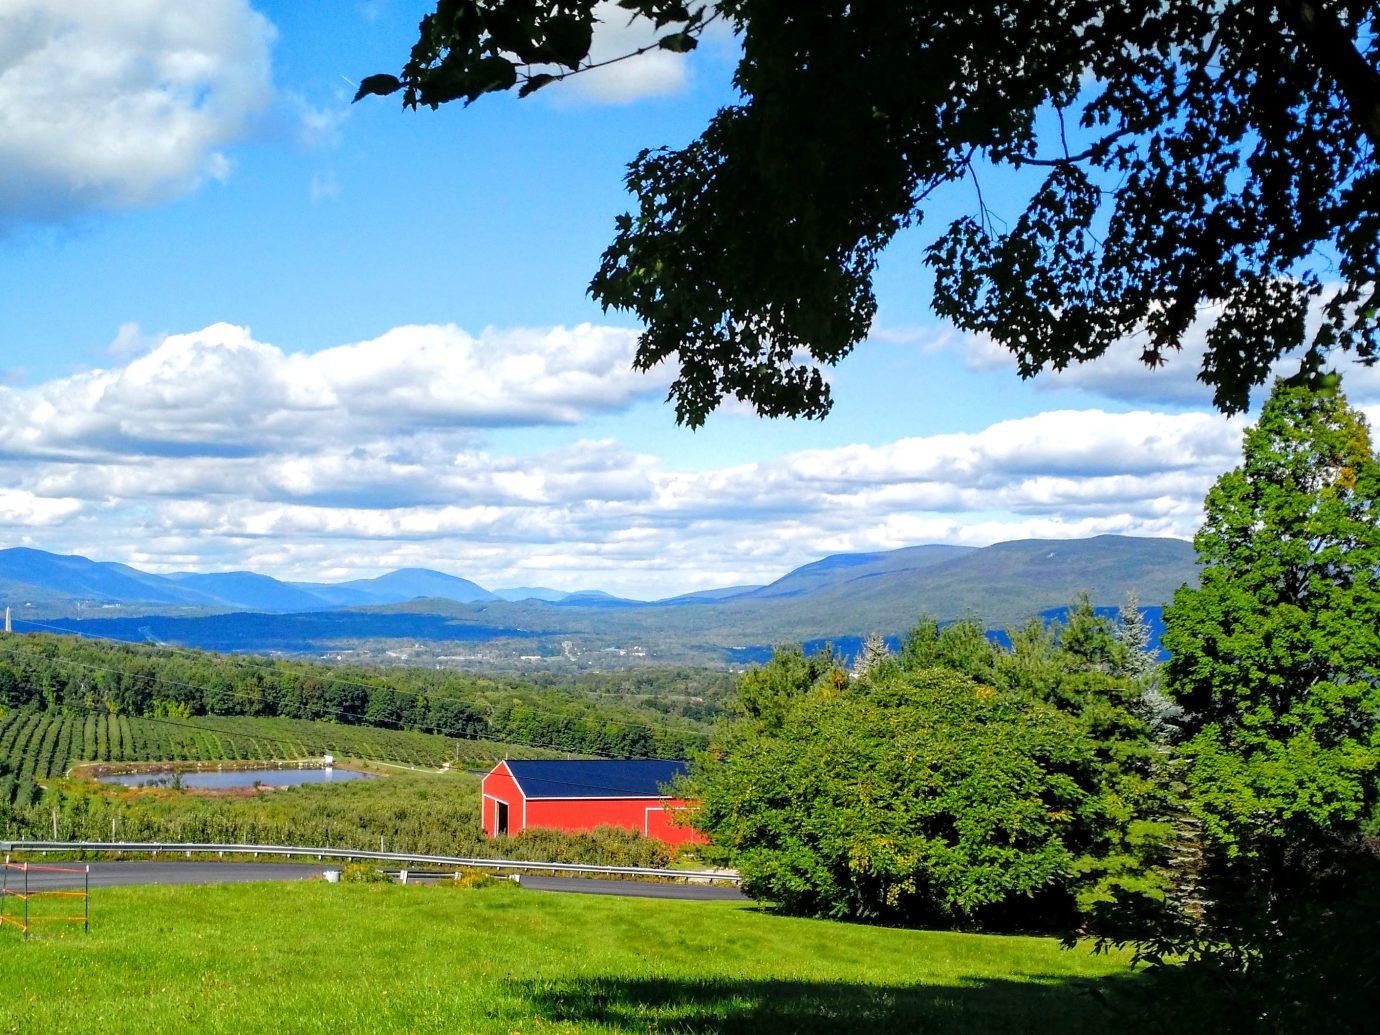 Scene of an apple orchard in Vermont